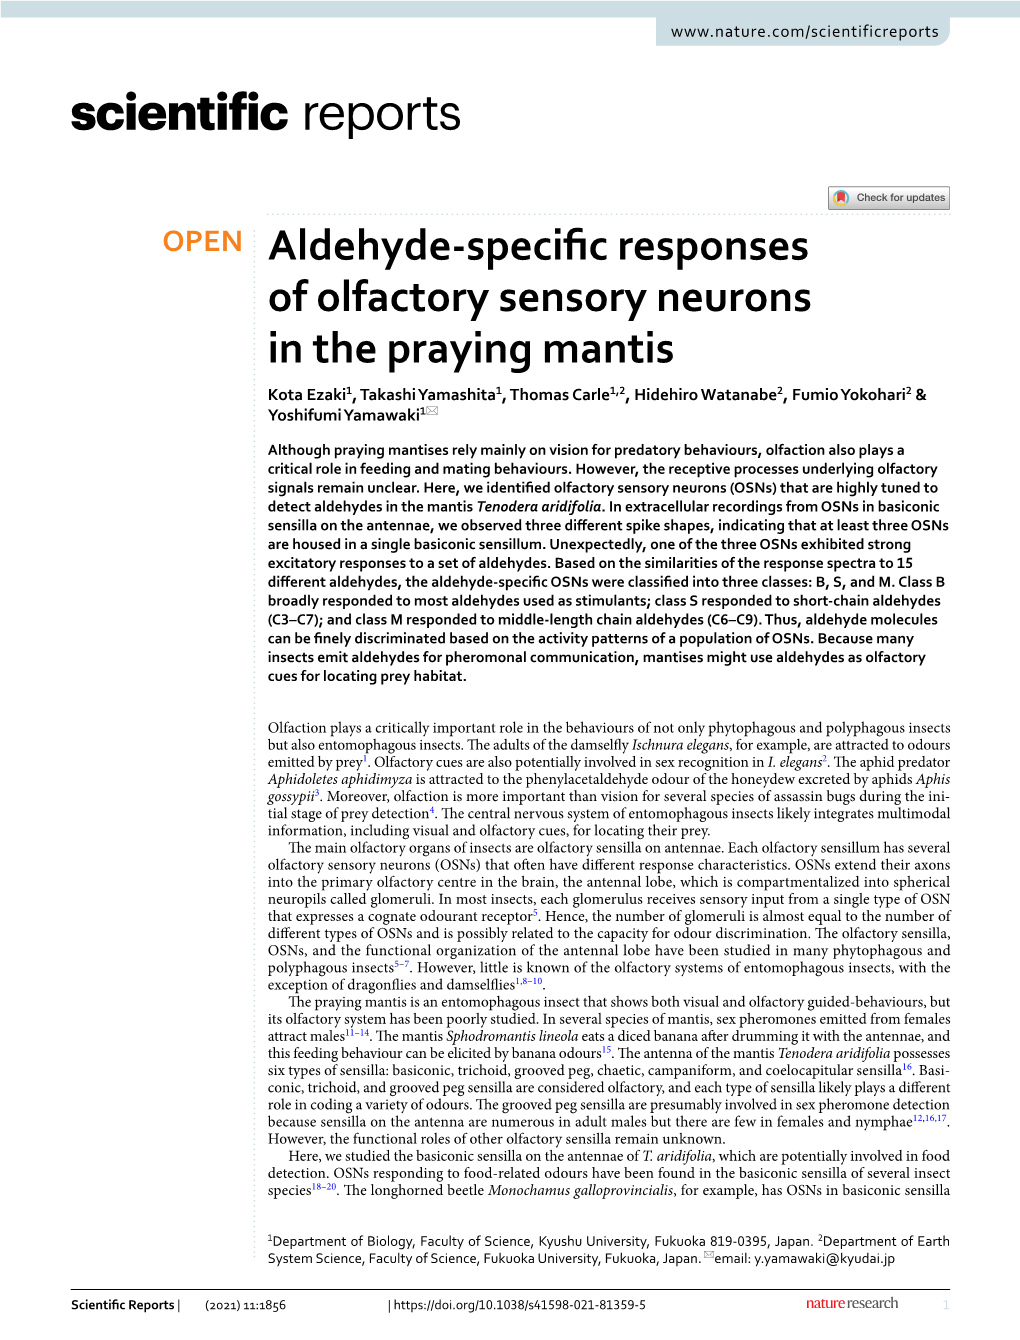 Aldehyde-Specific Responses of Olfactory Sensory Neurons in The